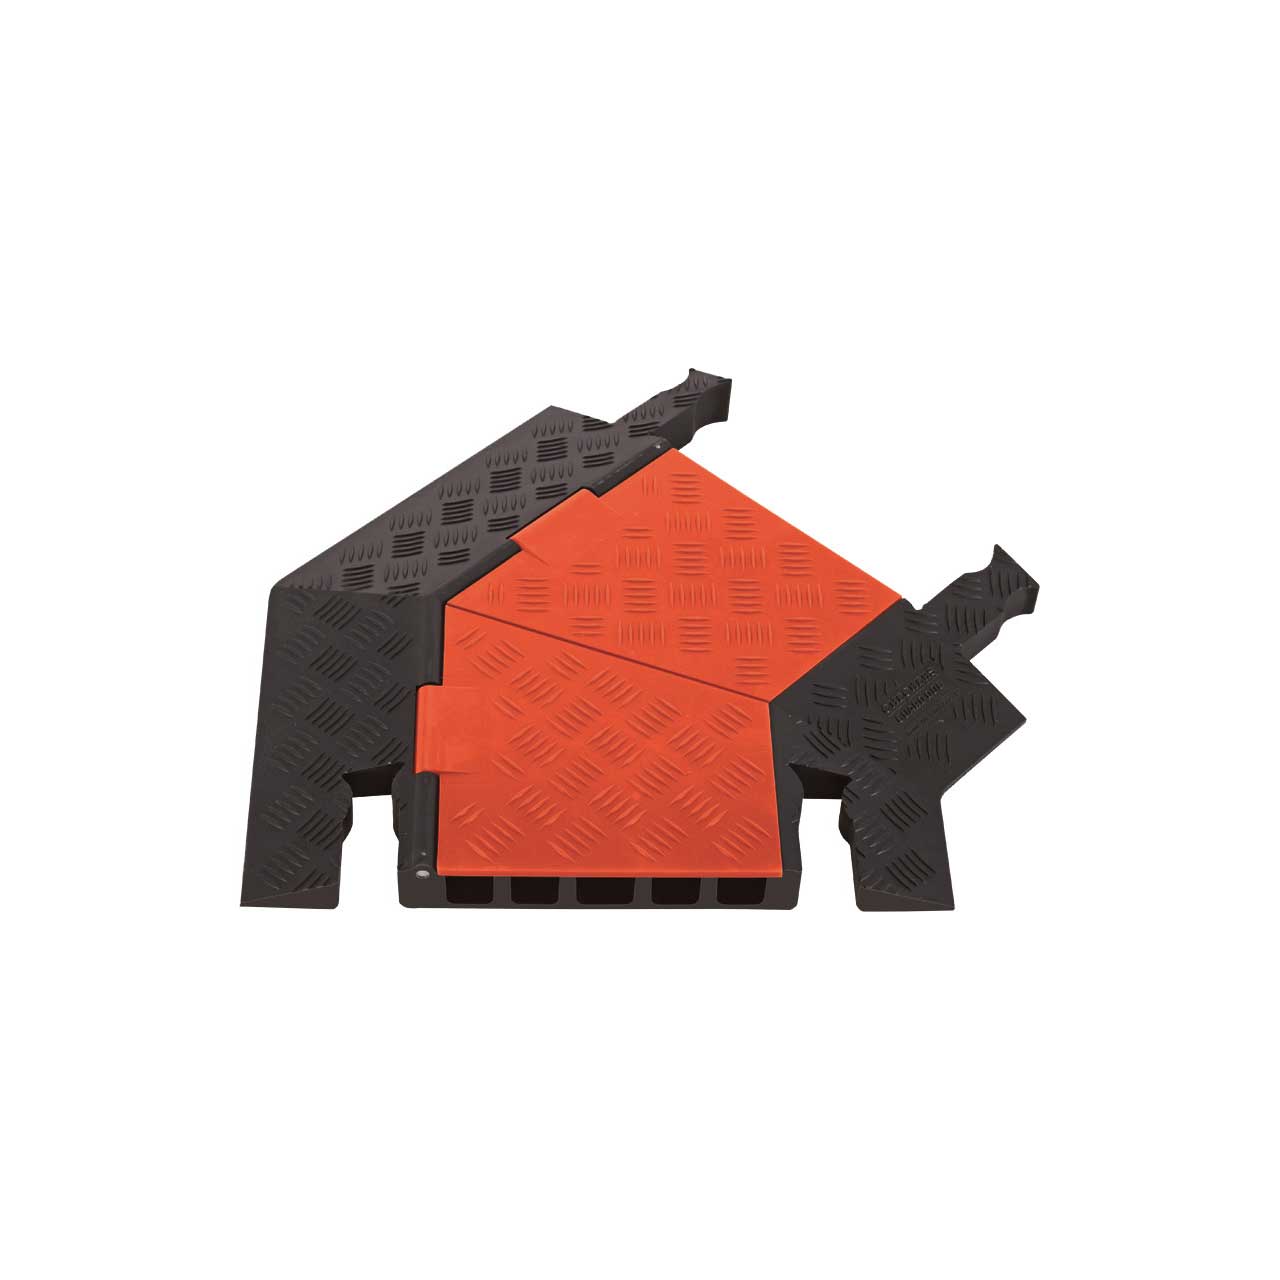 Guard Dog 45 Degree Right Turn For 5 Ch Cable Protector - Orange Lid / Black Ramps GDT5X125ROB